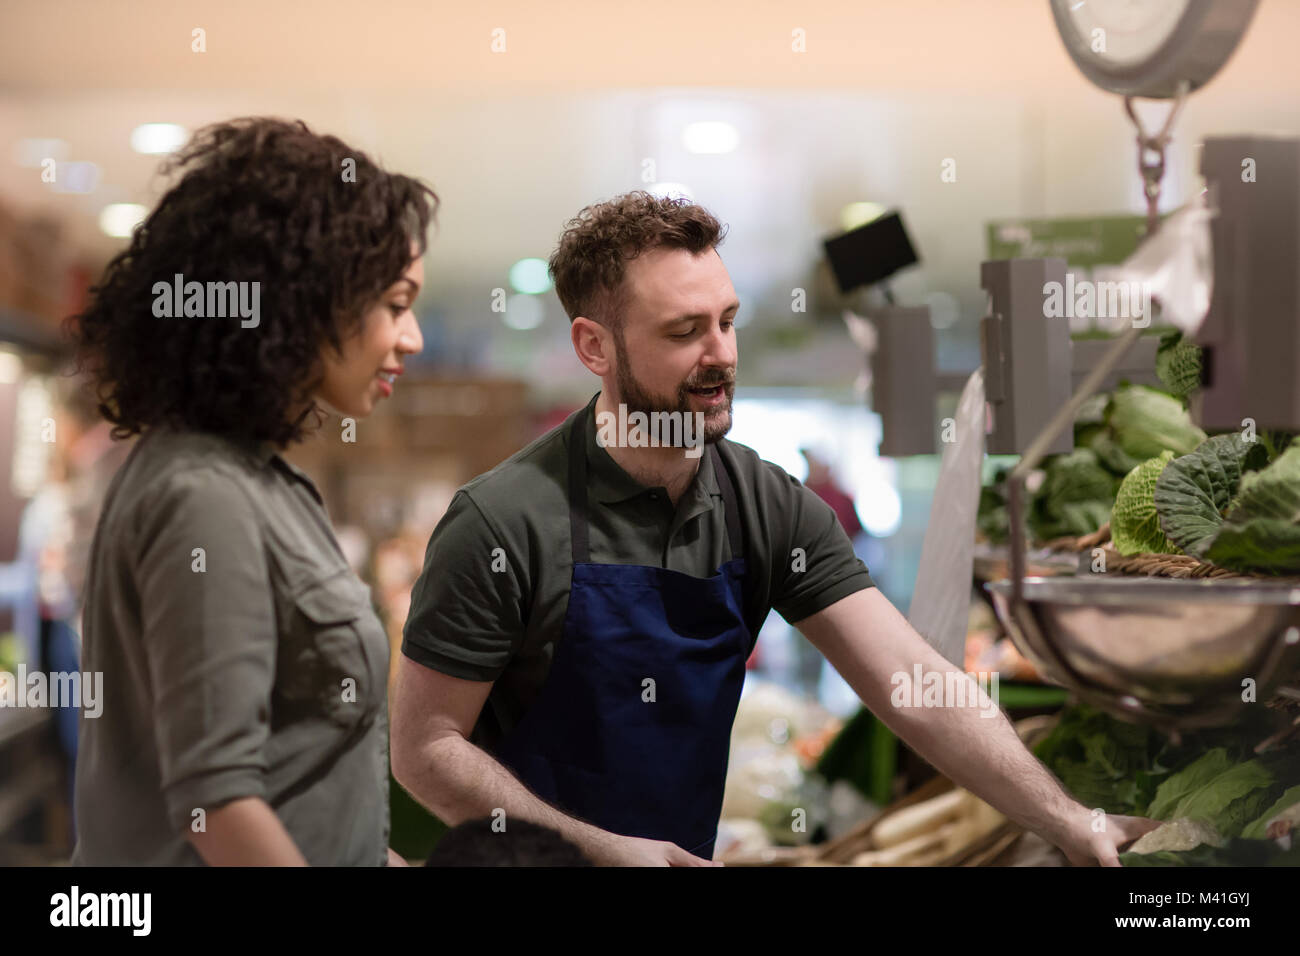 Shop assistant in grocery store helping shopper Stock Photo